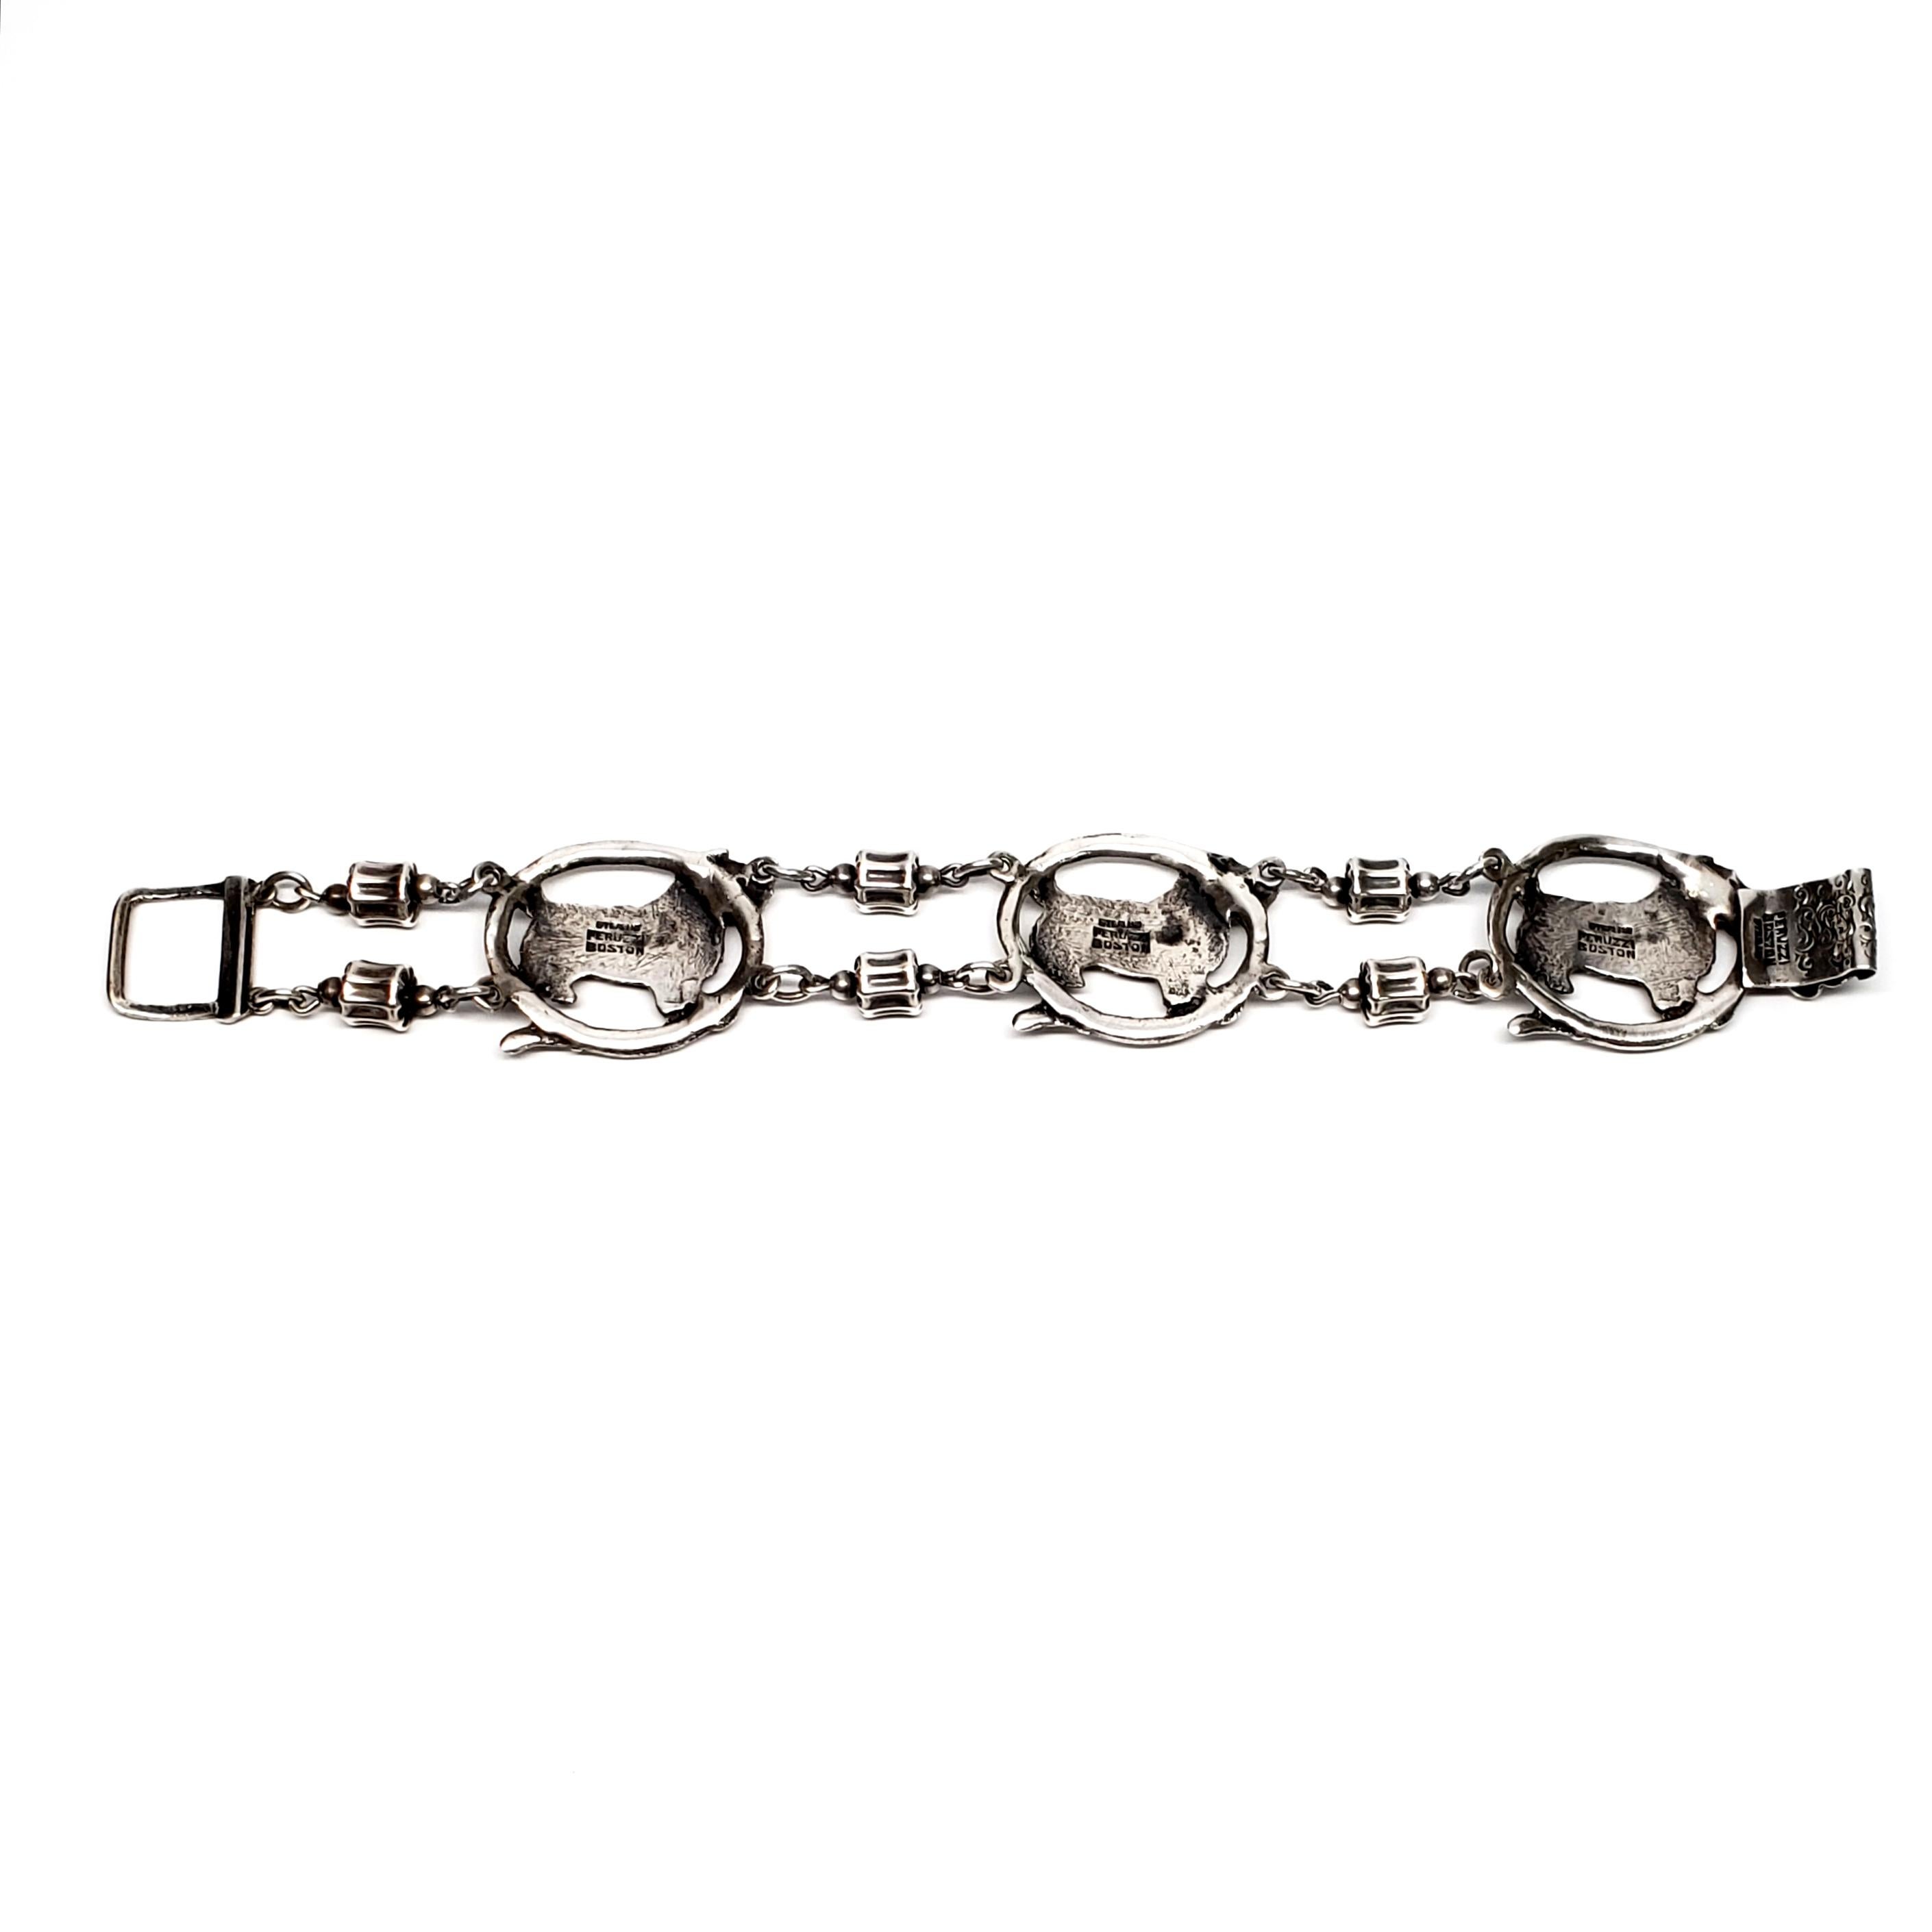 Vintage sterling silver link bracelet by Peruzzi of Boston.

This pretty bracelet is compromised of 3 panels depicting a small terrier type dog inside an oval belt or leash connected by double barrel beads.

Measures approx 7 1/4